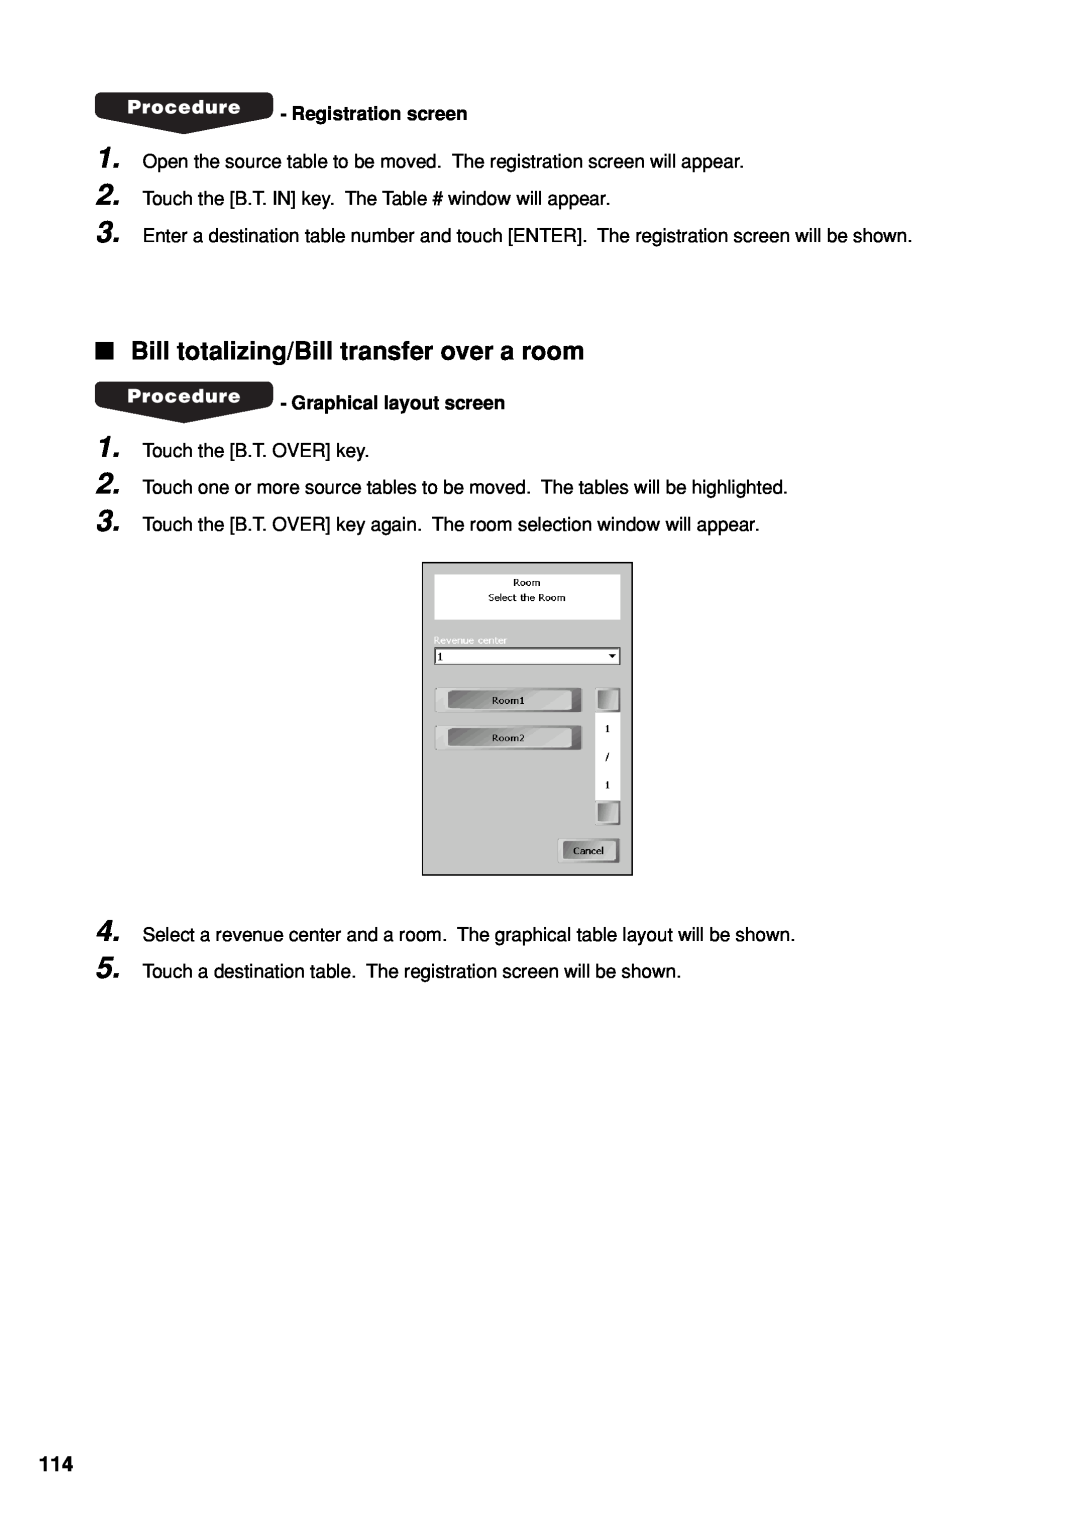 Sharp UP-X300 instruction manual Bill totalizing/Bill transfer over a room, Registration screen, Graphical layout screen 